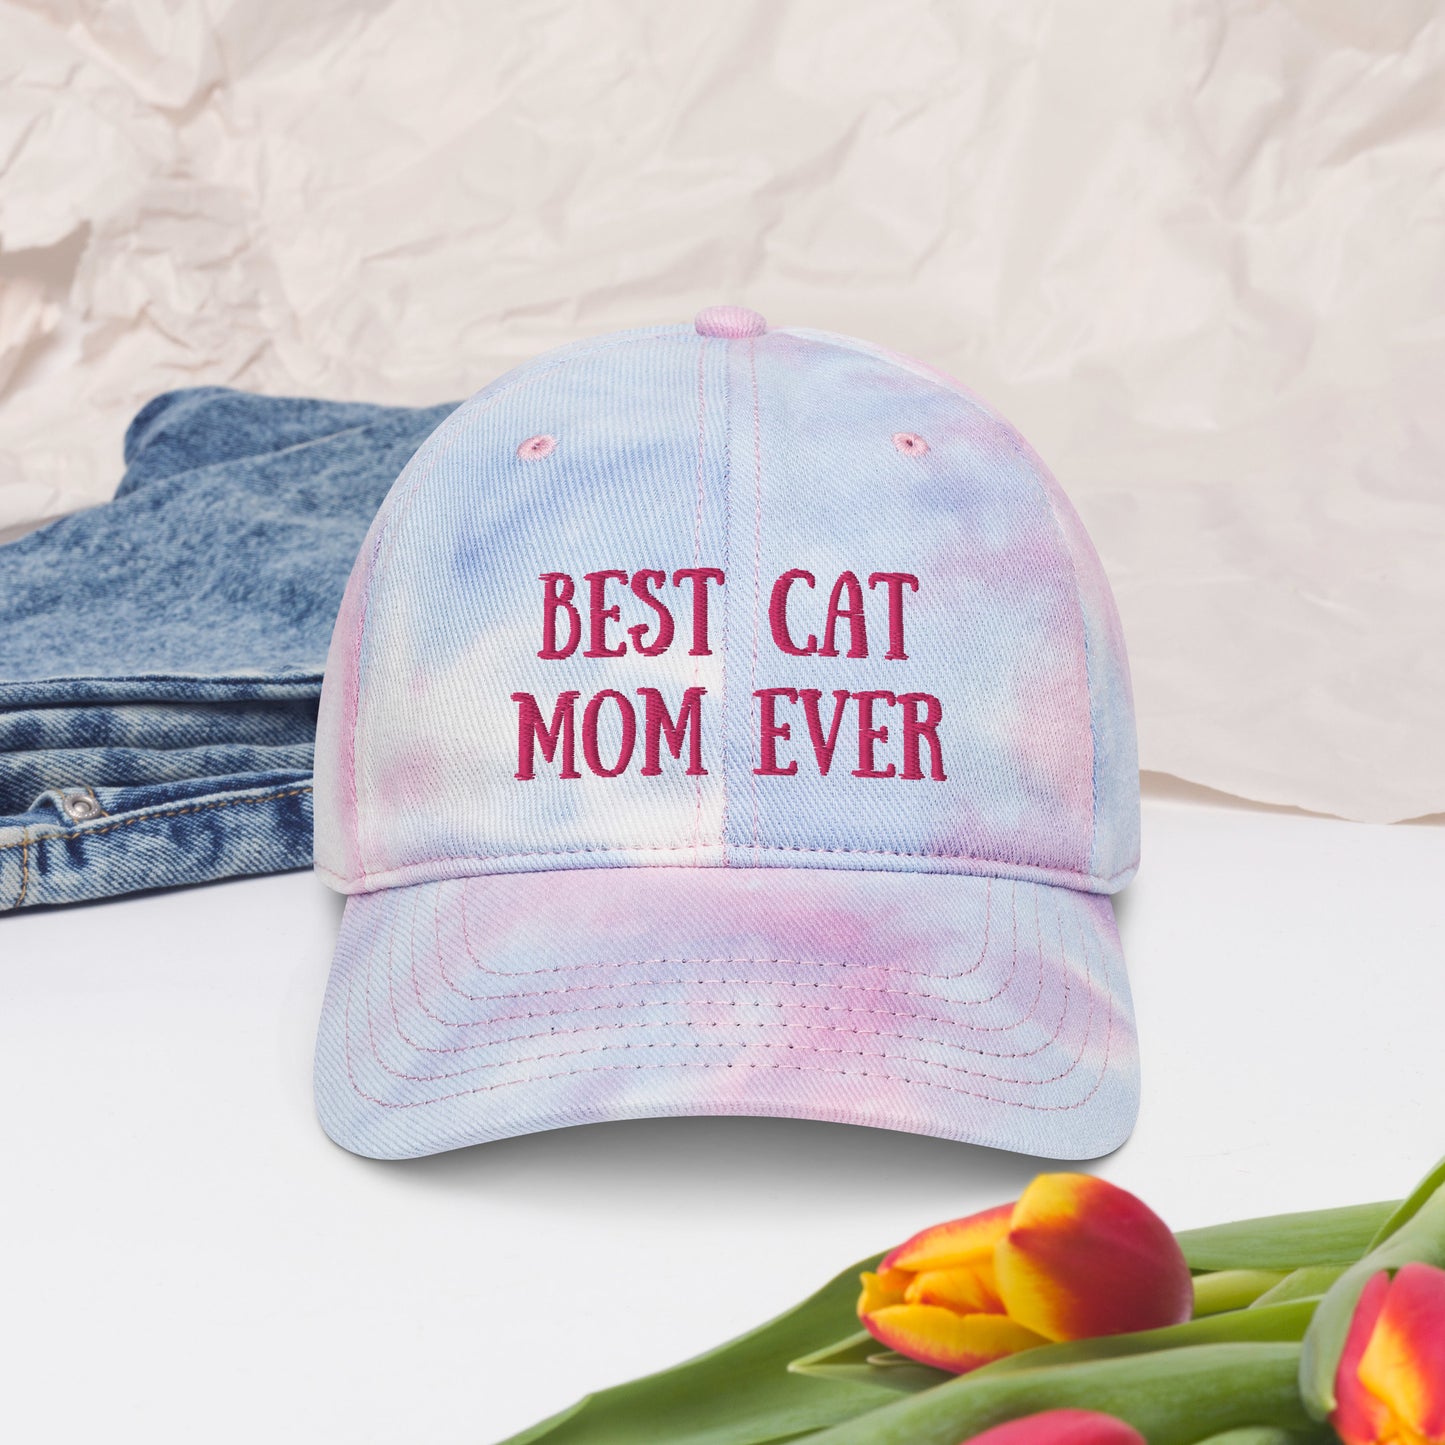 Best Cat Mom Tie dye hat - Ghostly Tails